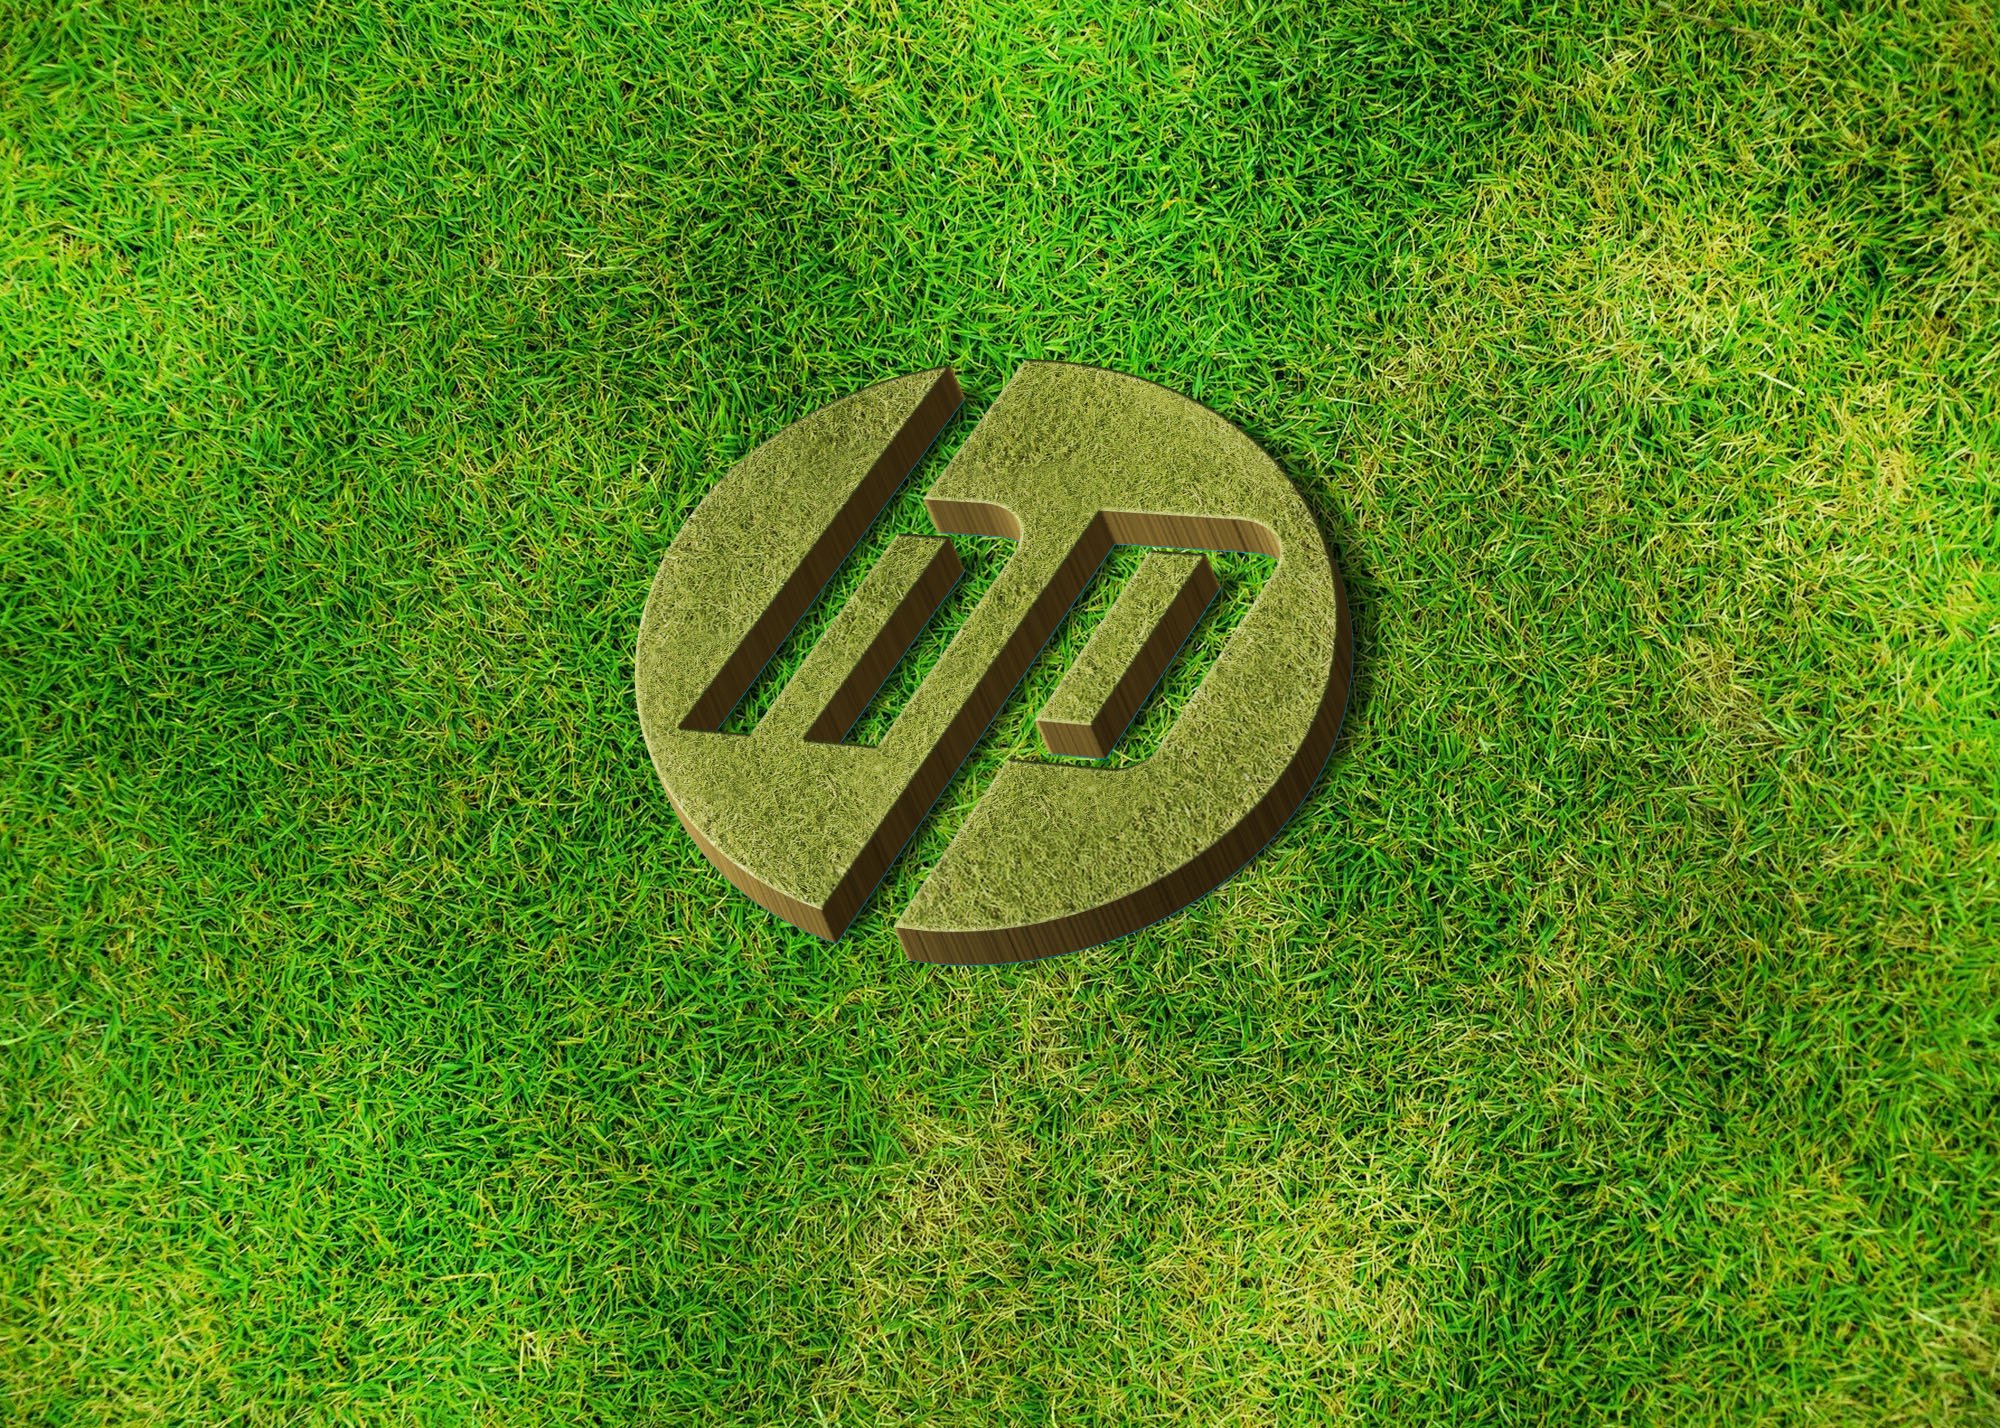 HP logo on realistic 3d grass